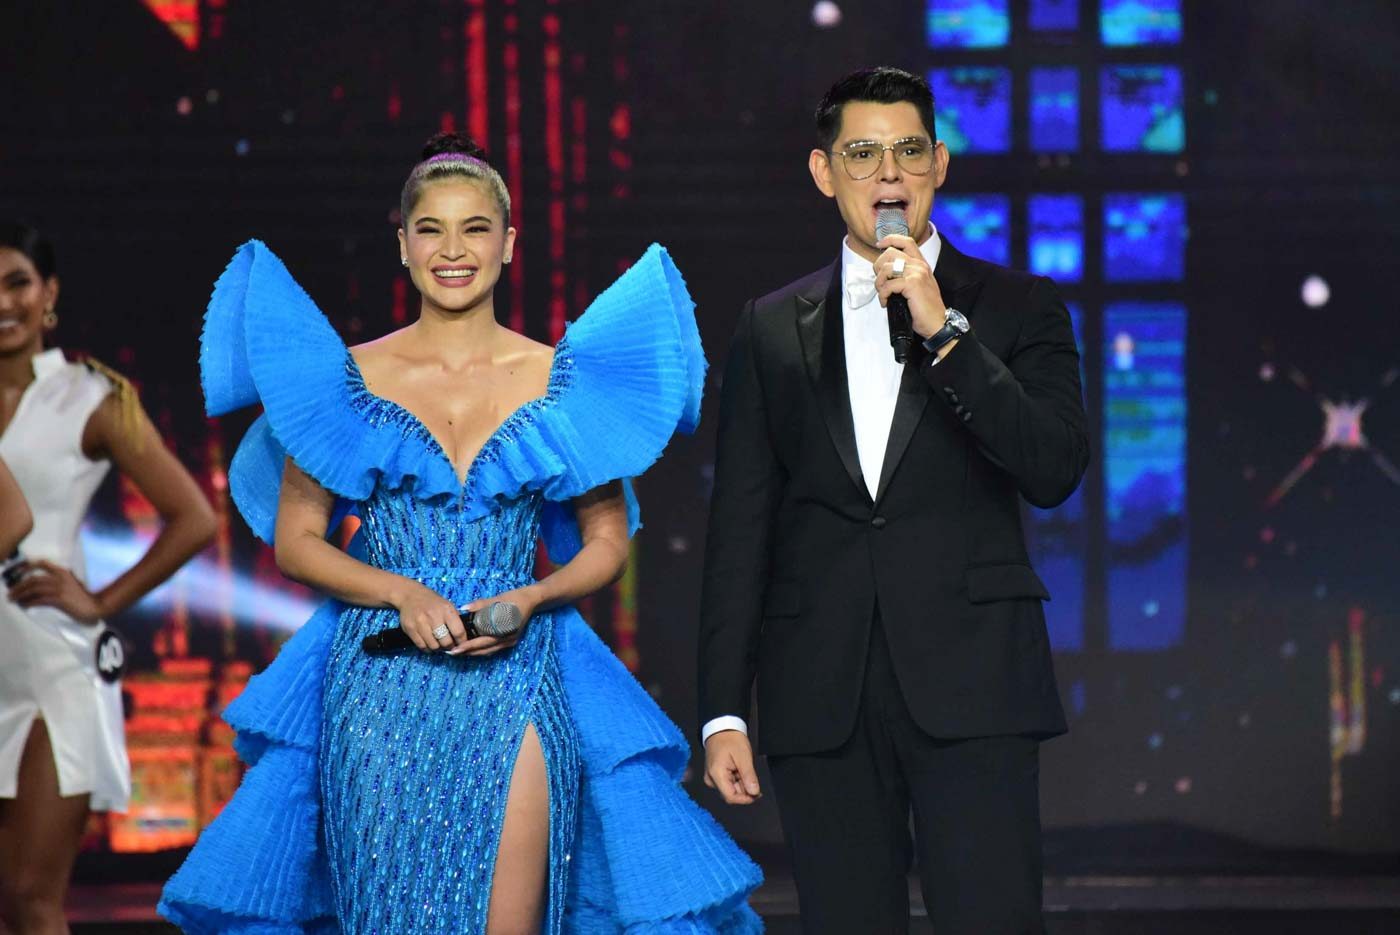 IN PHOTOS: Anne Curtis’ fashion moments at the Binibining Pilipinas 2019 finals night